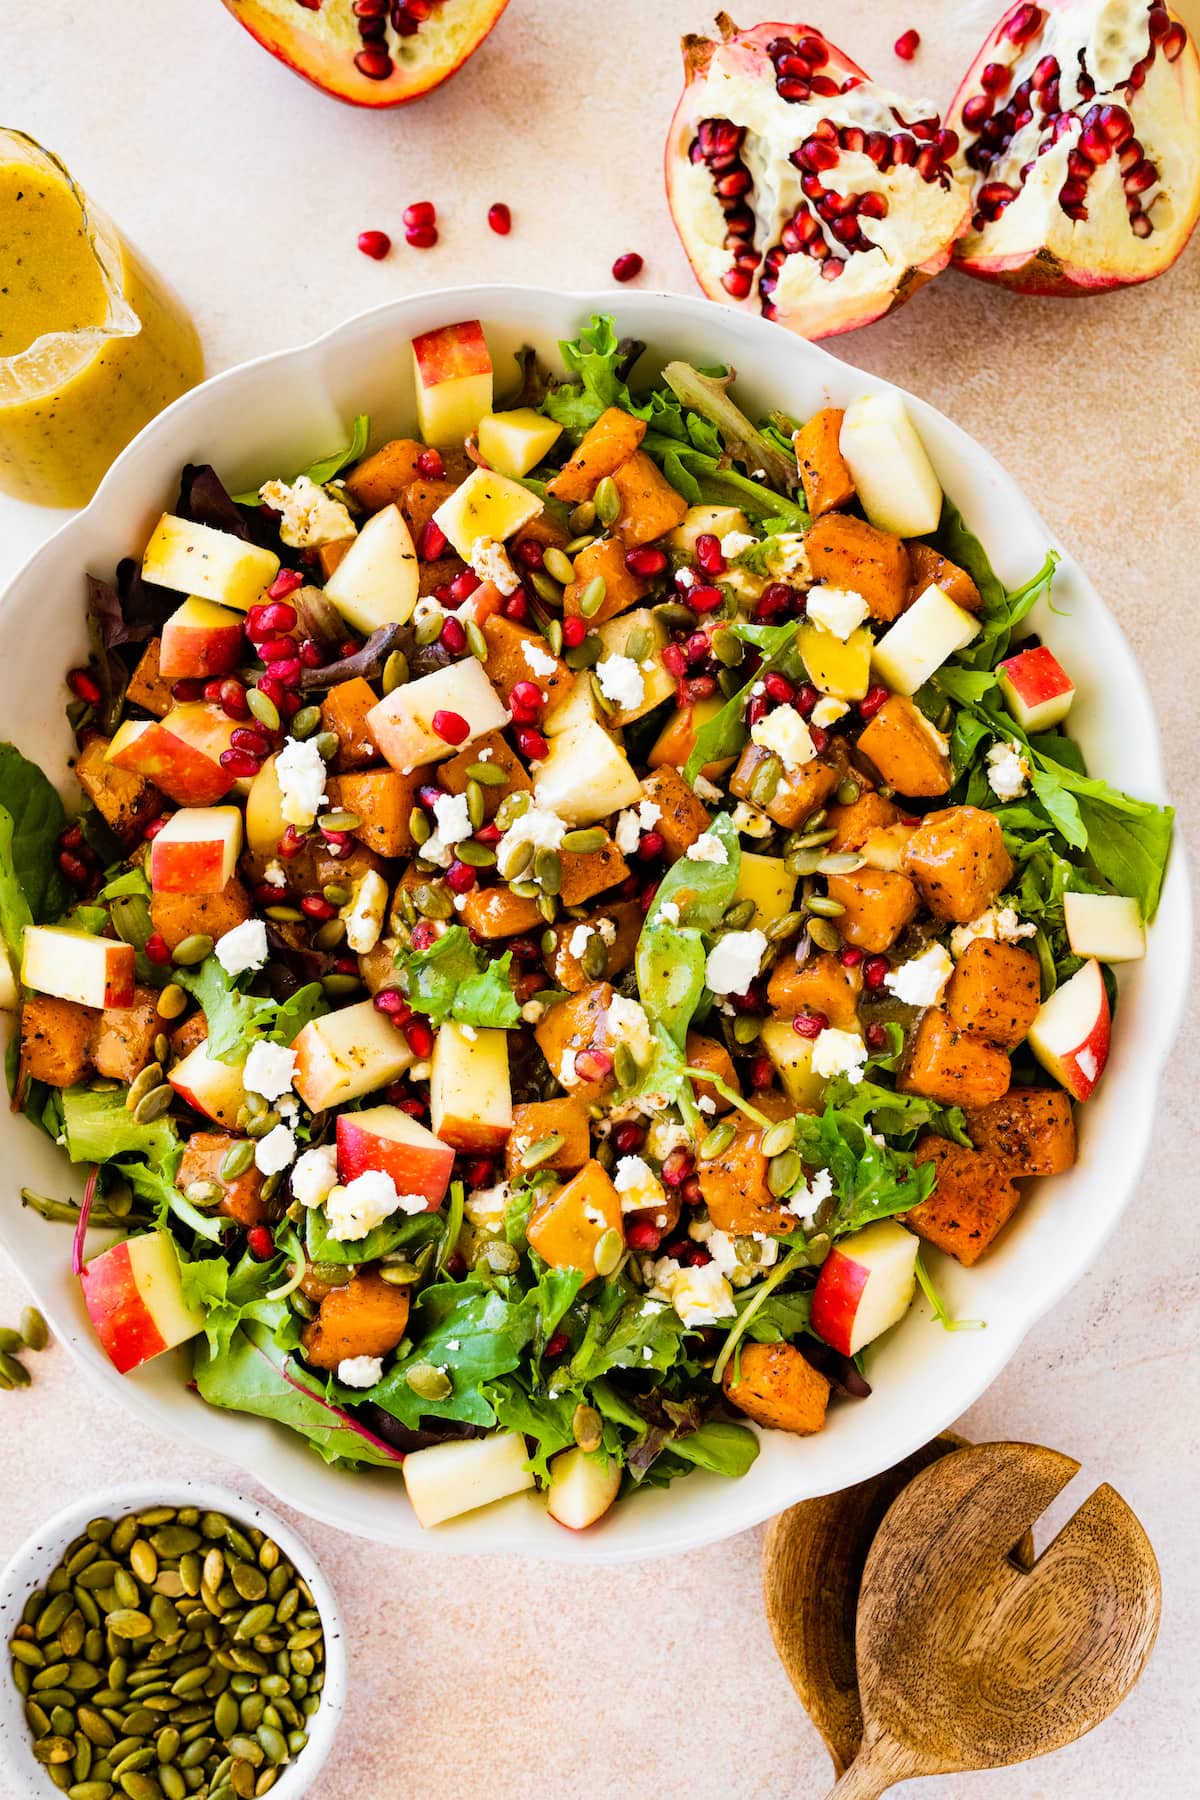 A large bowl of Thanksgiving salad with some noticeable ingredients including pomegranate, diced apple, spinach, pumpkin seeds, and more.